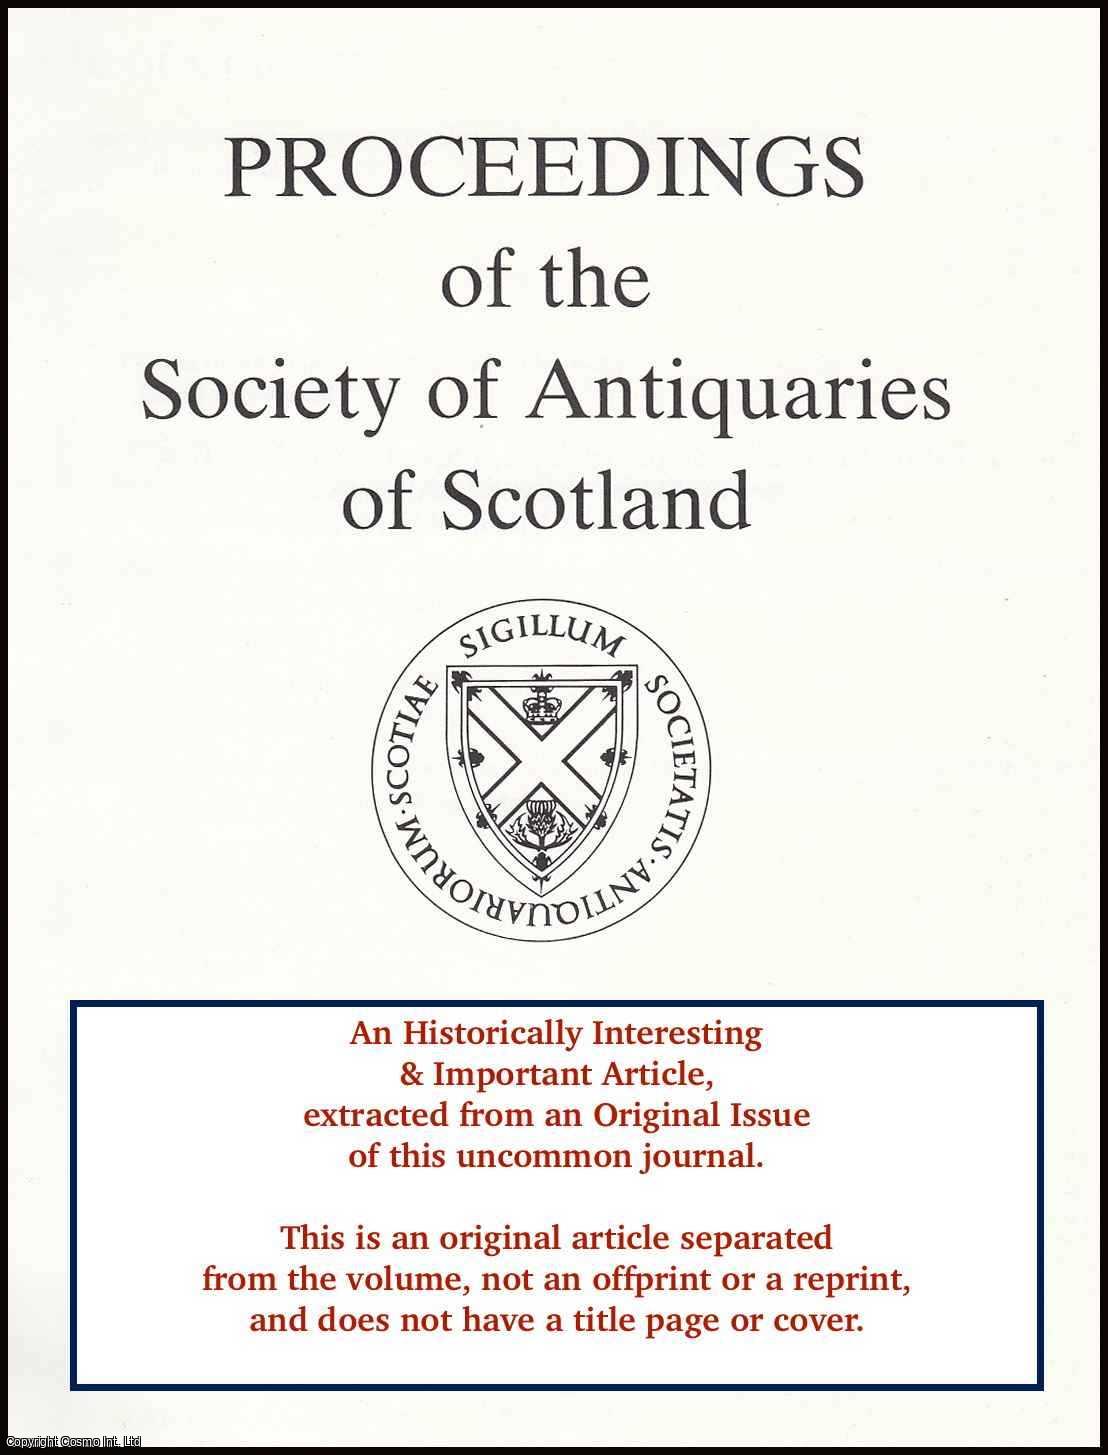 Angus Graham - Old Harbours and Landing-Places on The East Coast of Scotland. An original article from the Proceedings of the Society of Antiquaries of Scotland, 1977.